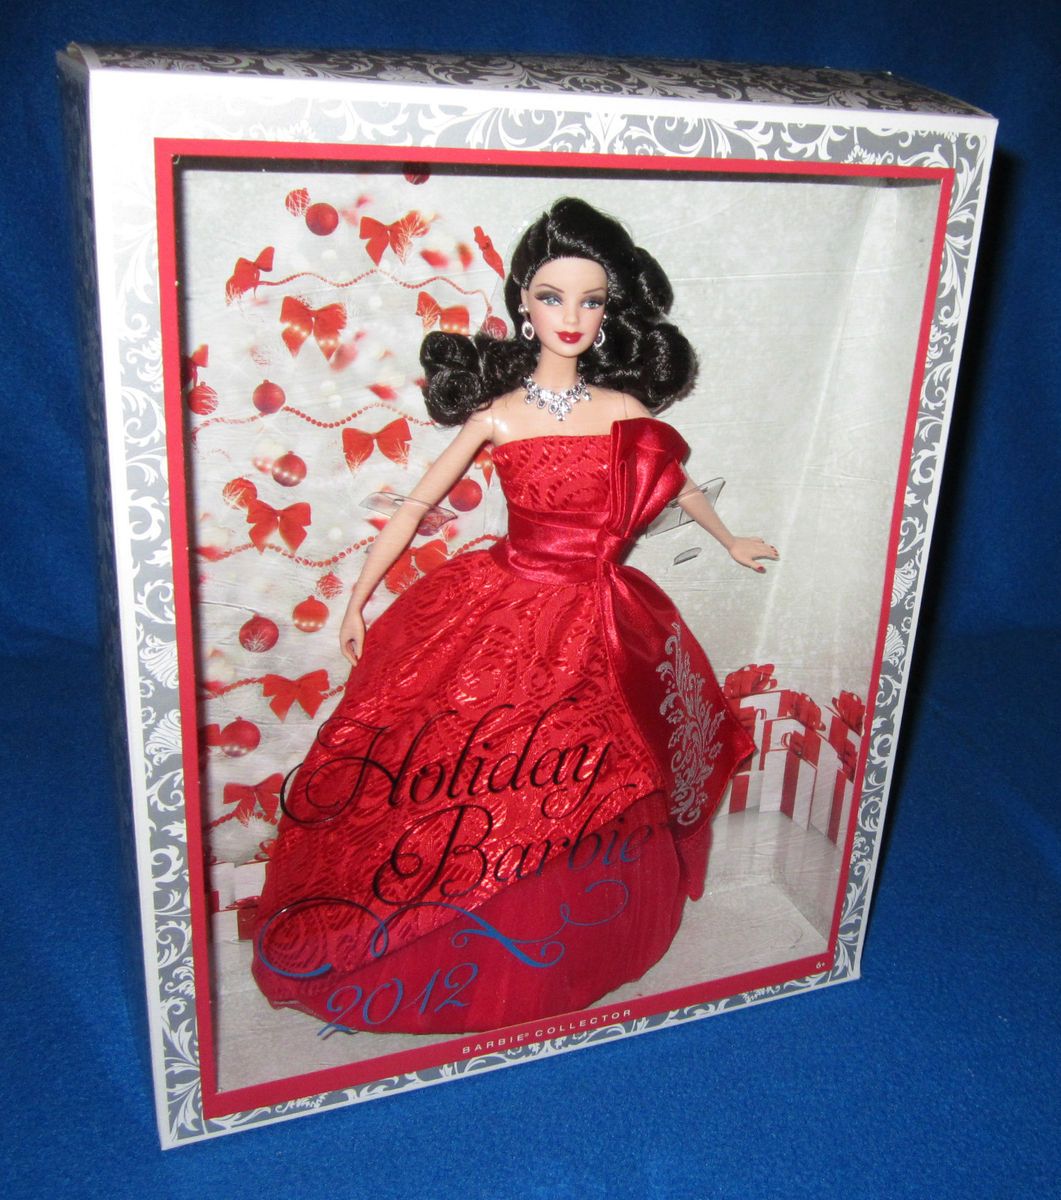 Holiday Christmas Barbie 2012 Brunette Exclusive Doll New